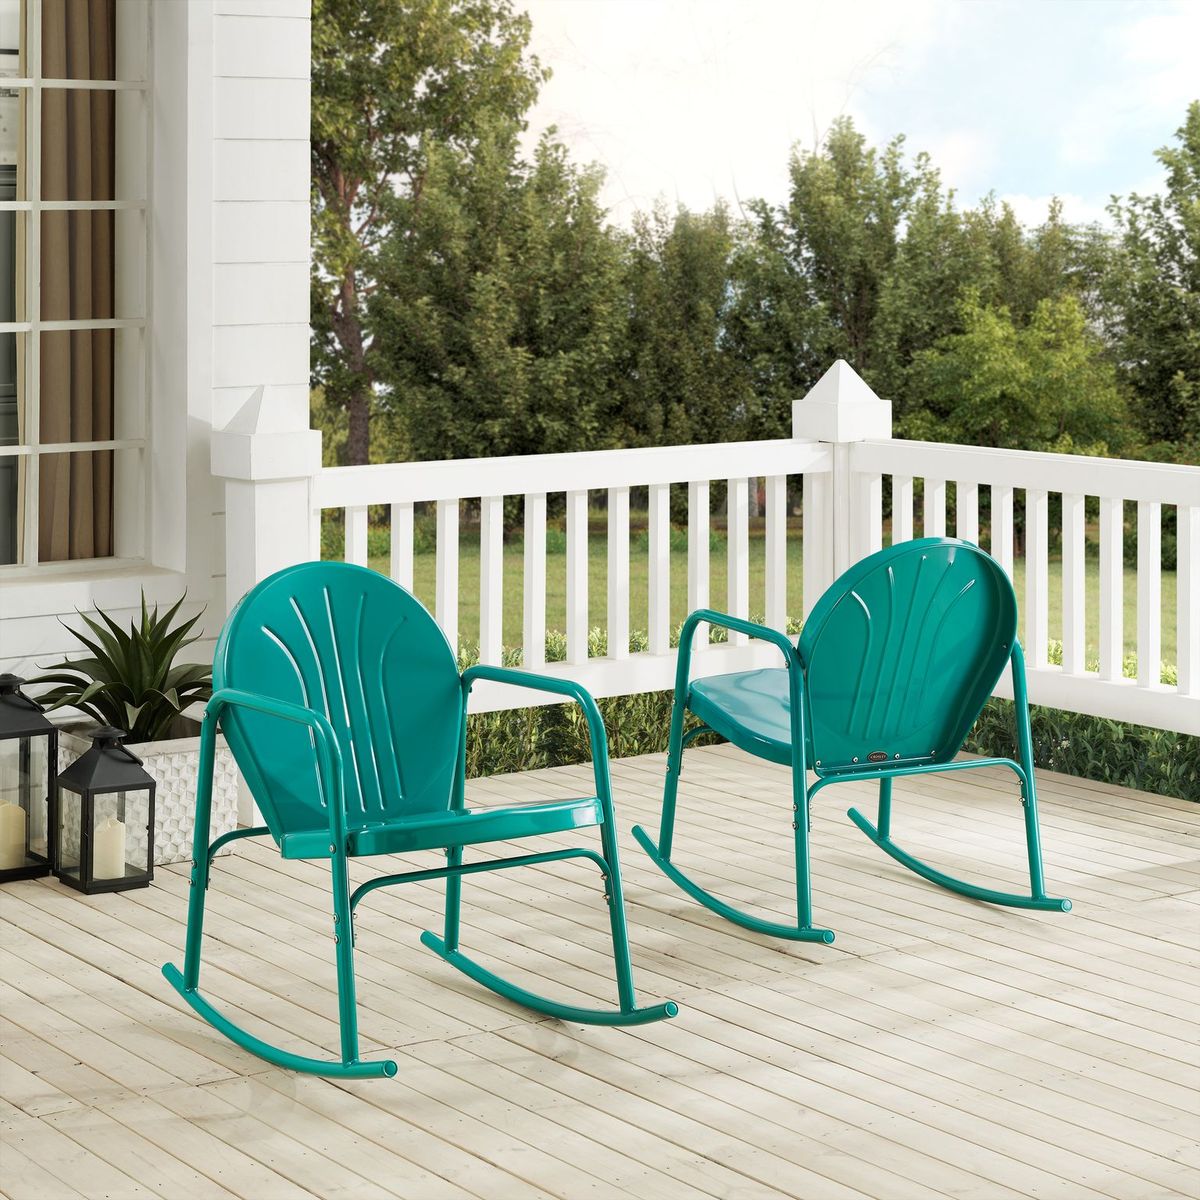 Co1013-tu Outdoor Rocking Chair Set, Turquoise Gloss - 2 Chairs - 2 Piece